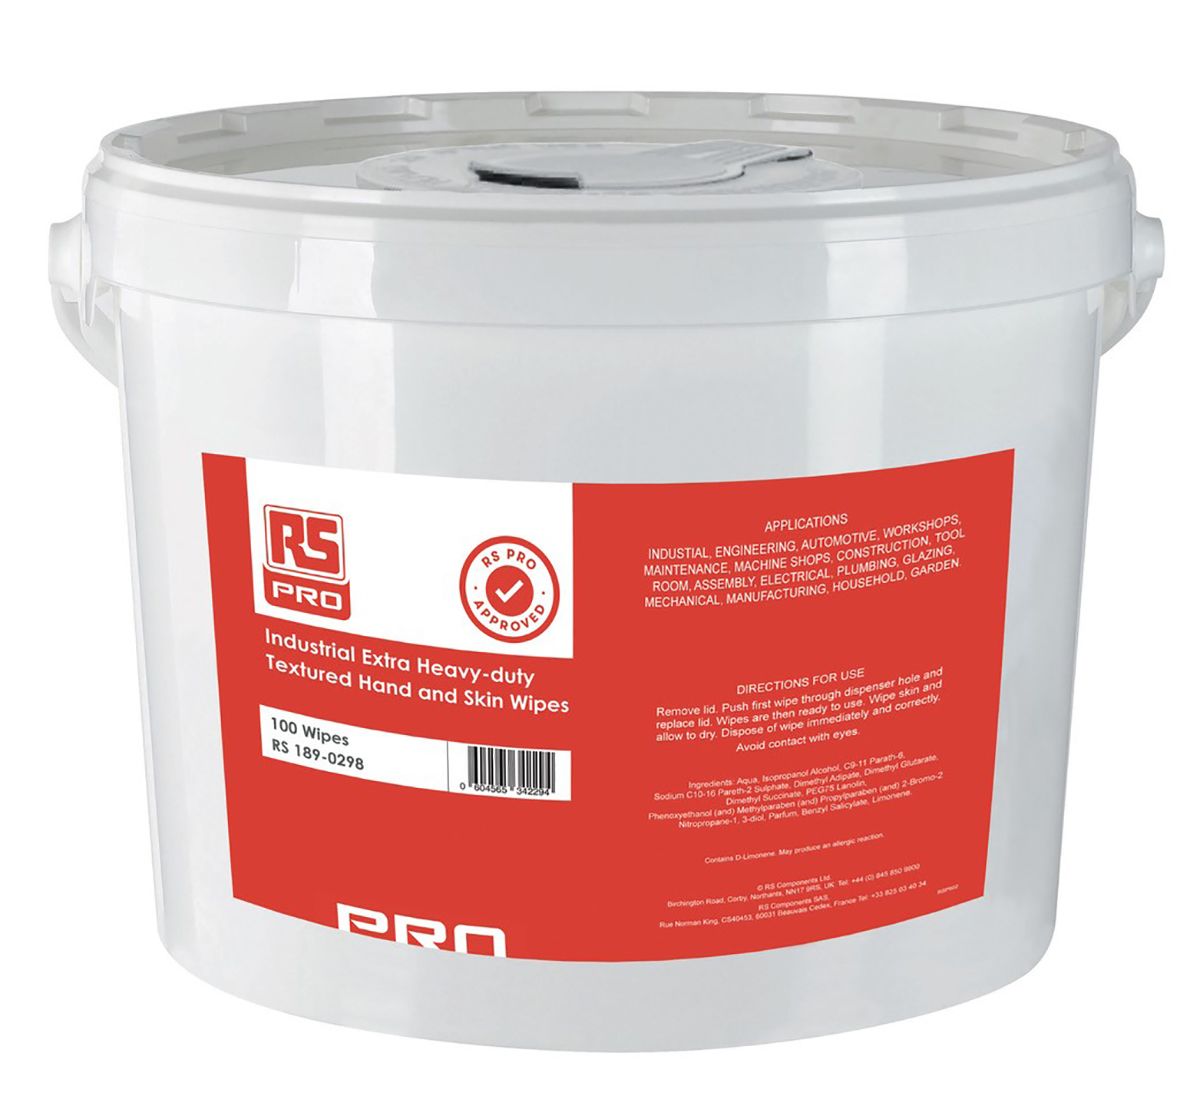 RS PRO Wet Hand Wipes for Hand Cleaning Use, Bucket of 100